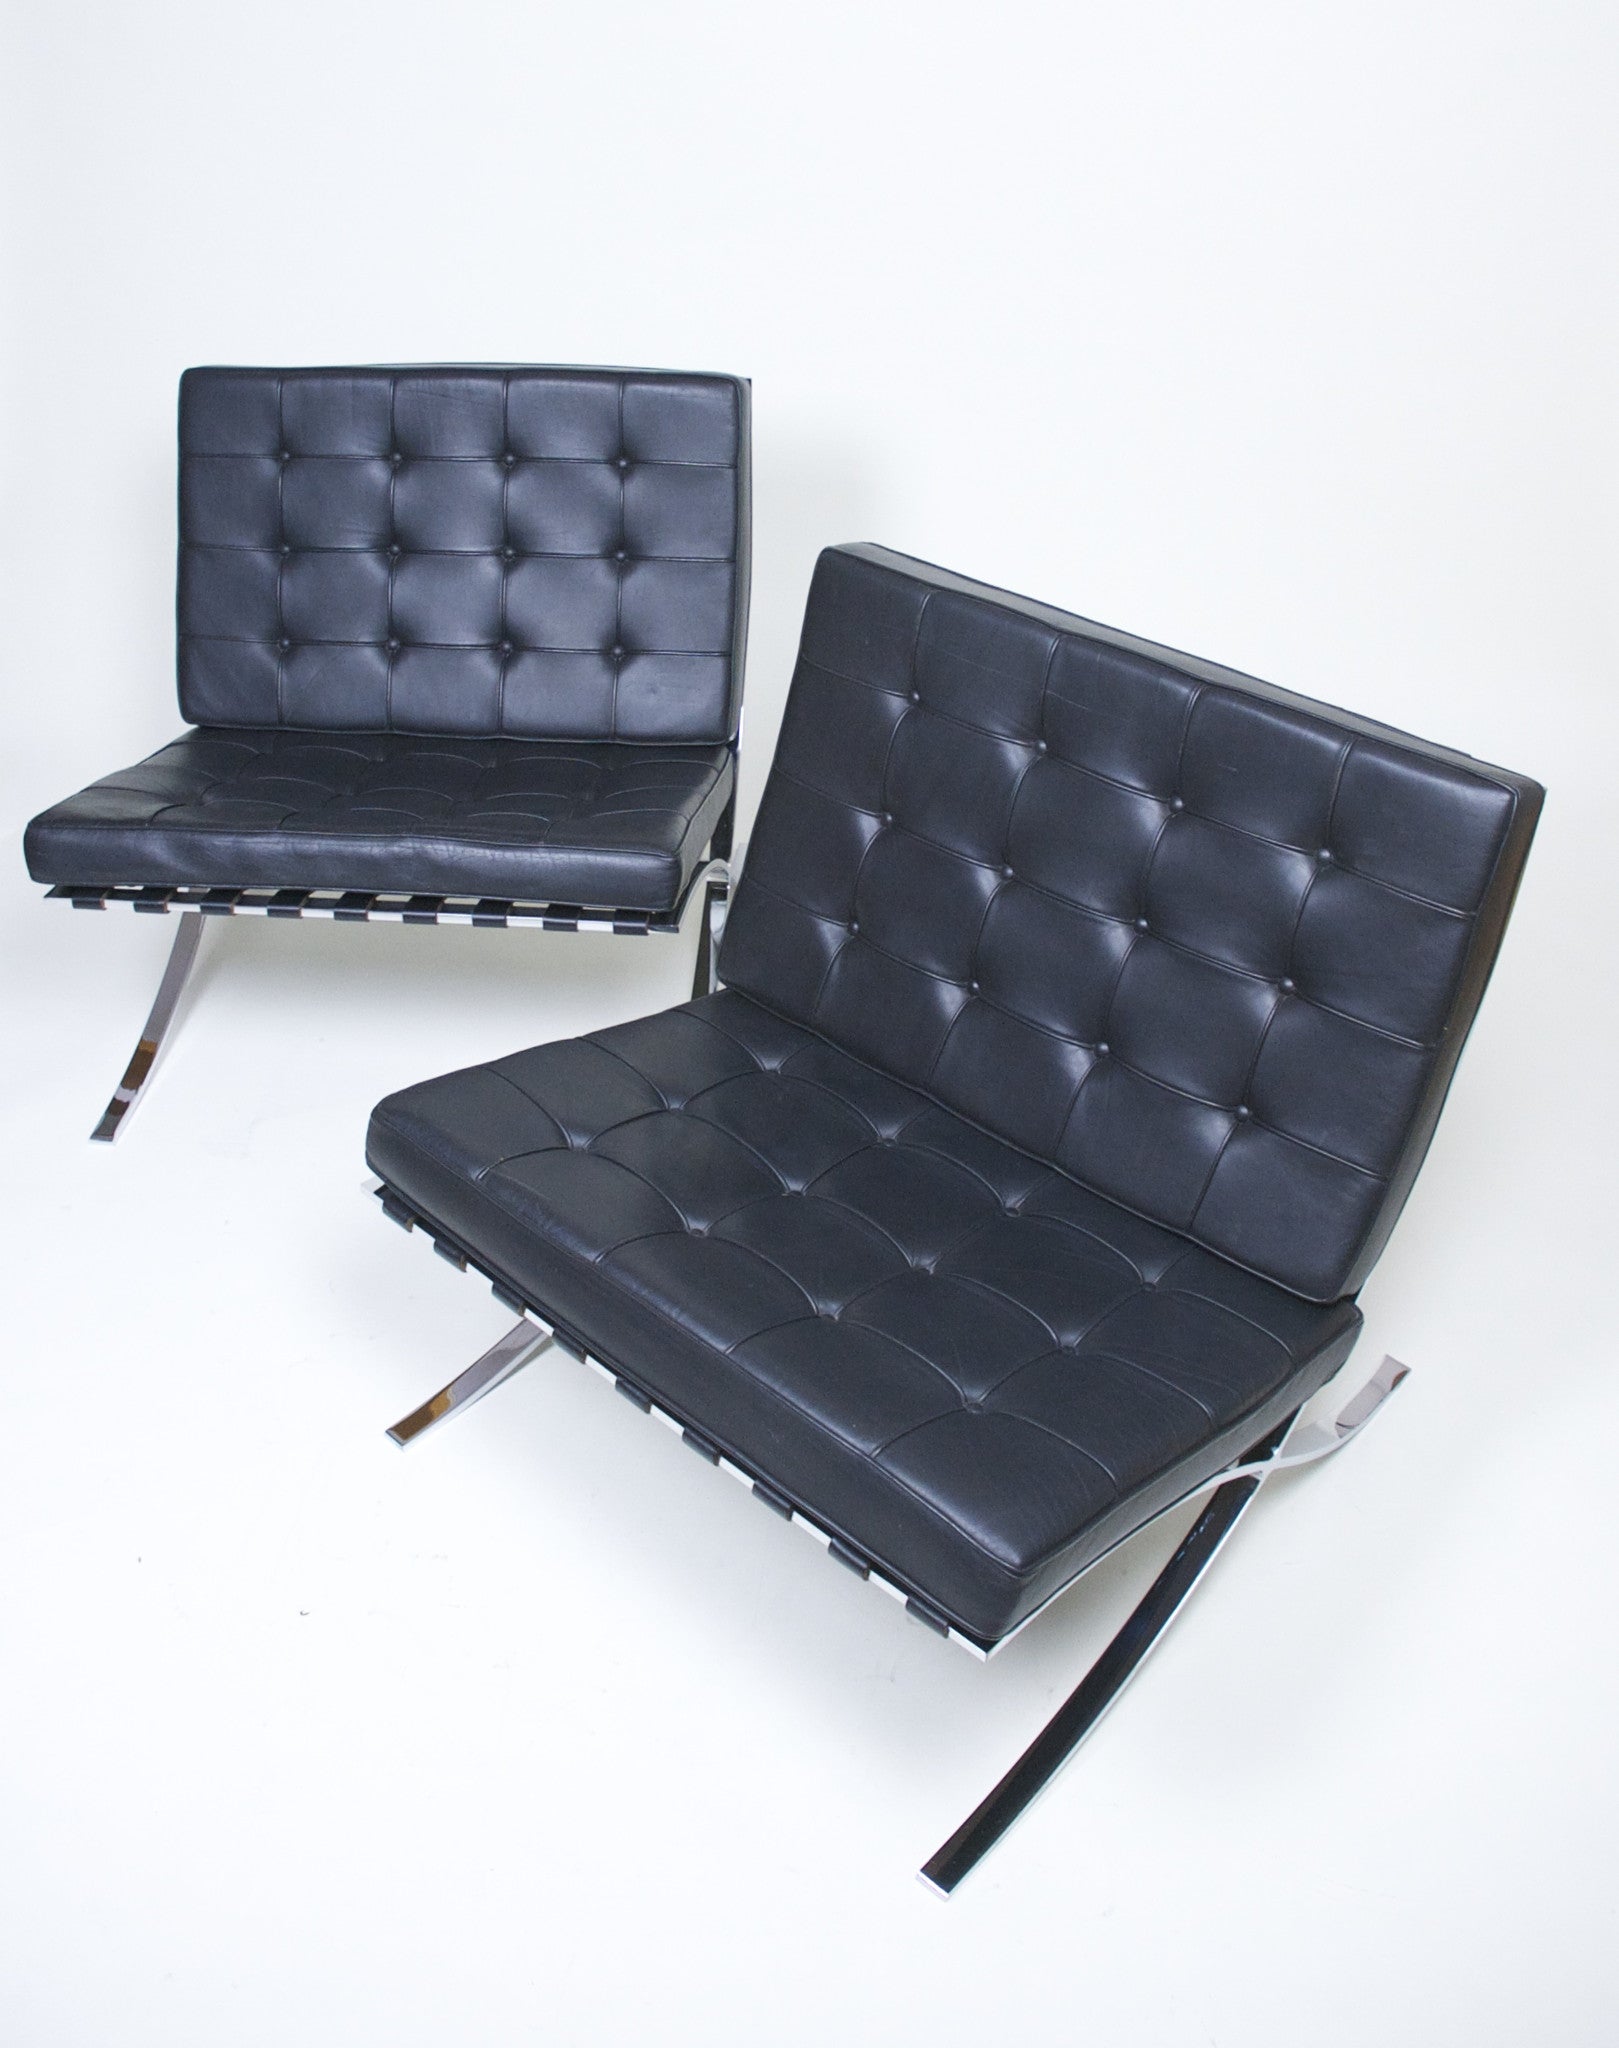 SOLD Knoll Barcelona Chair Mies Van Der Rohe Black Leather #1